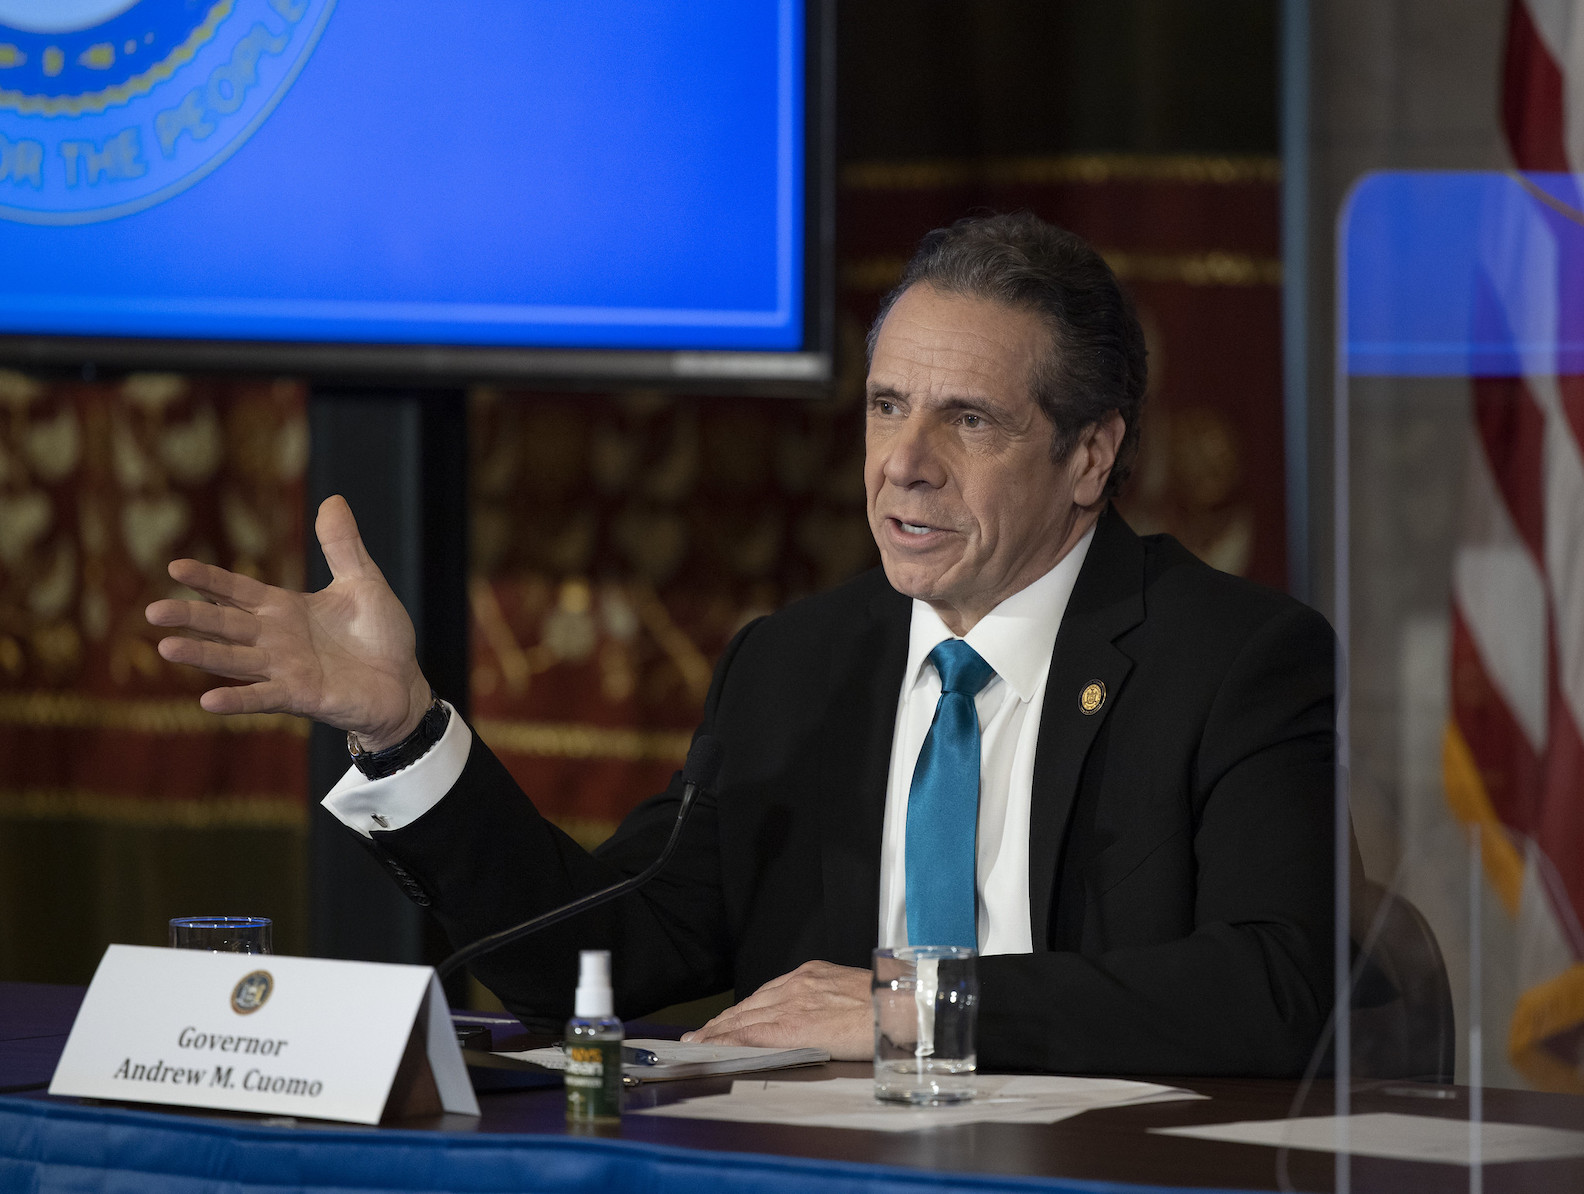 Gov. Andrew Cuomo provides a coronavirus update from the Red Room at the State Capitol on Feb. 19. (Photo by Mike Groll/Office of Gov. Andrew M. Cuomo)